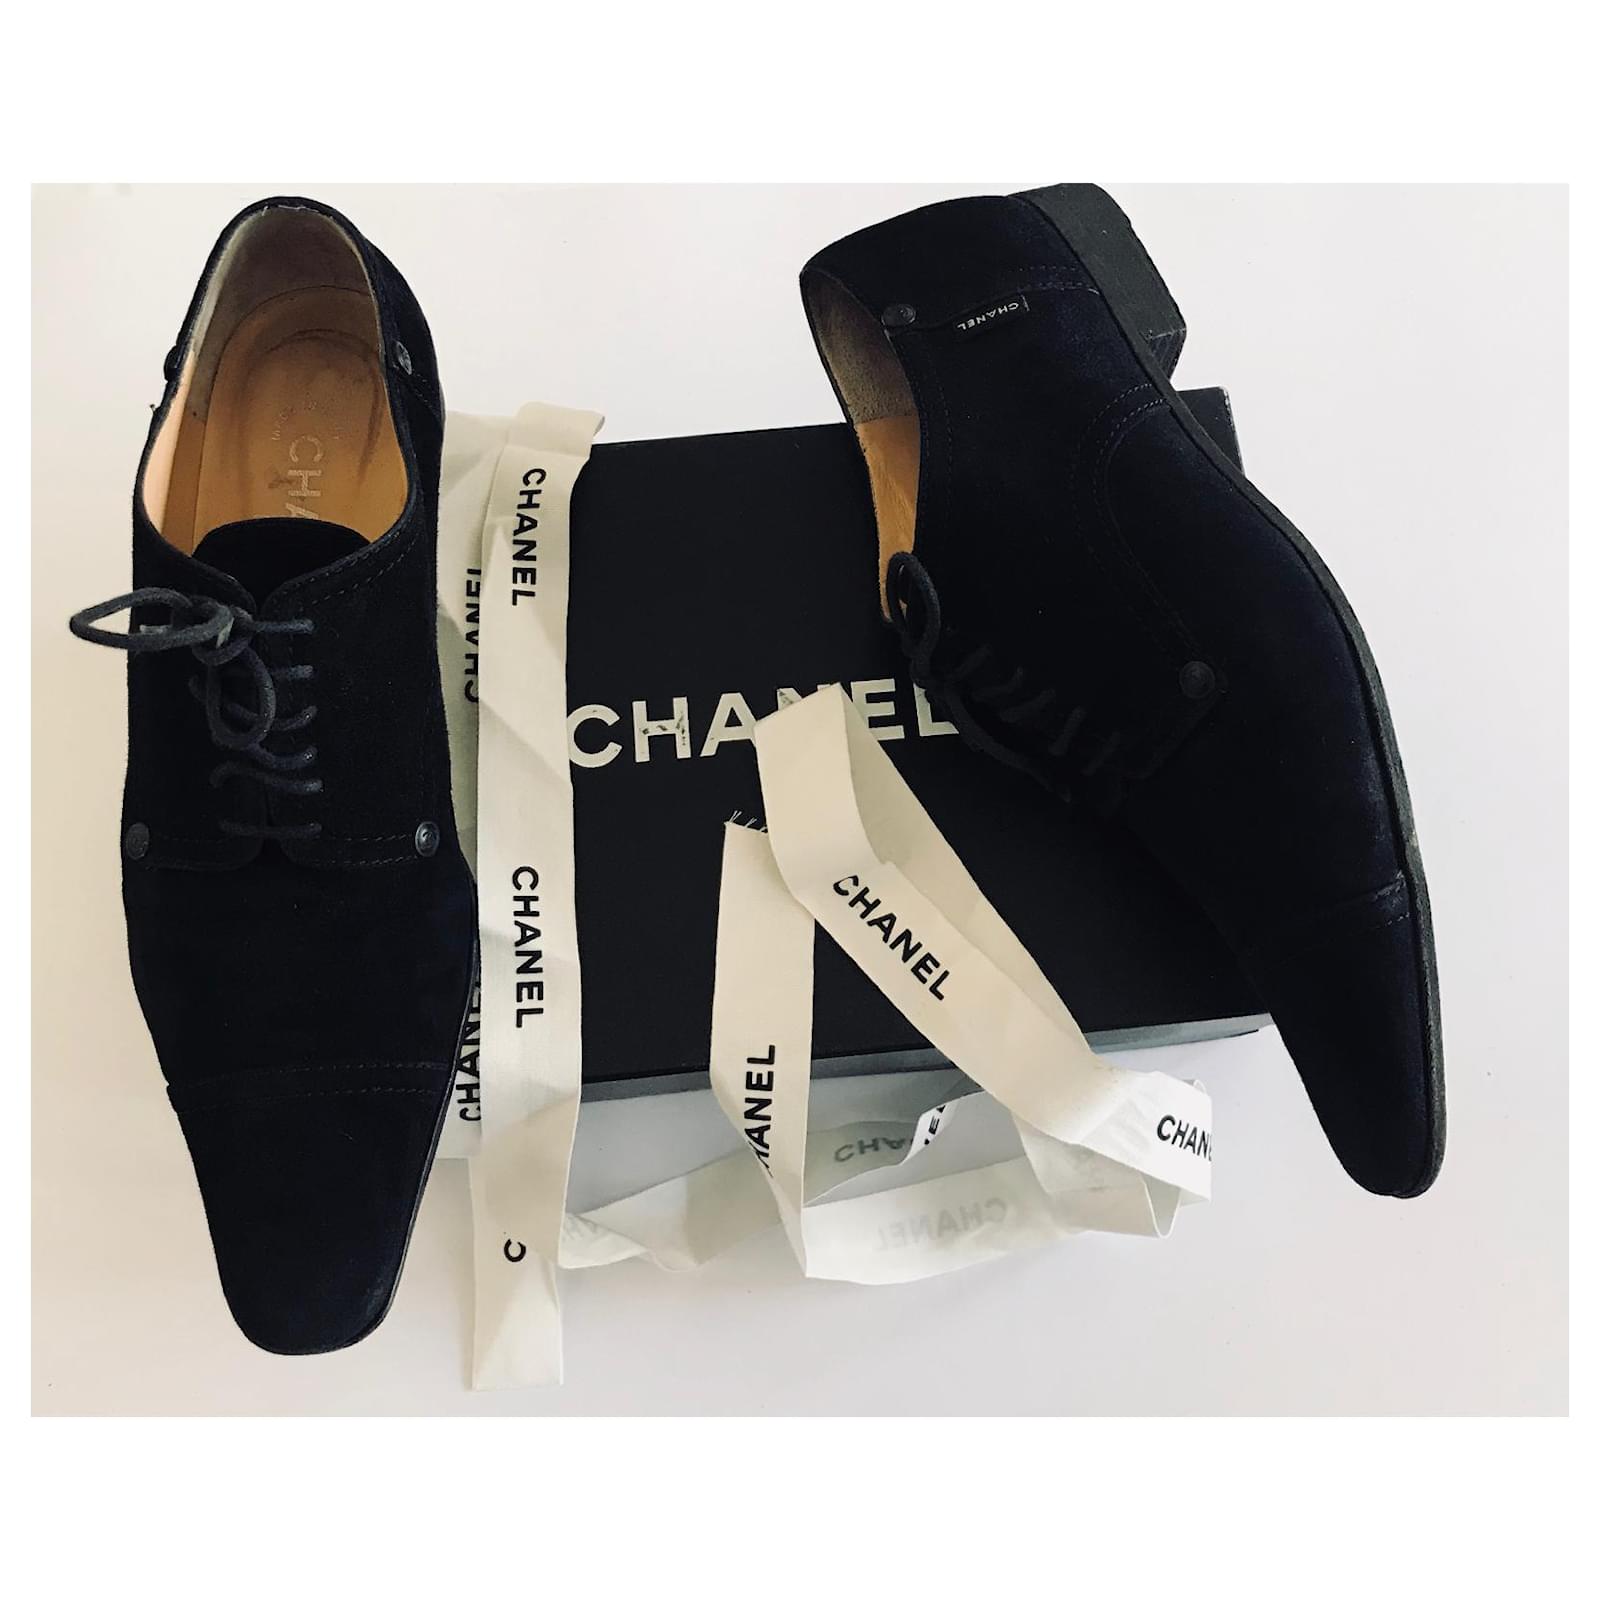 NEW CHANEL SHOES HIGH HIGH ESPADRILLES G29600 39 BLACK LEATHER SHOES